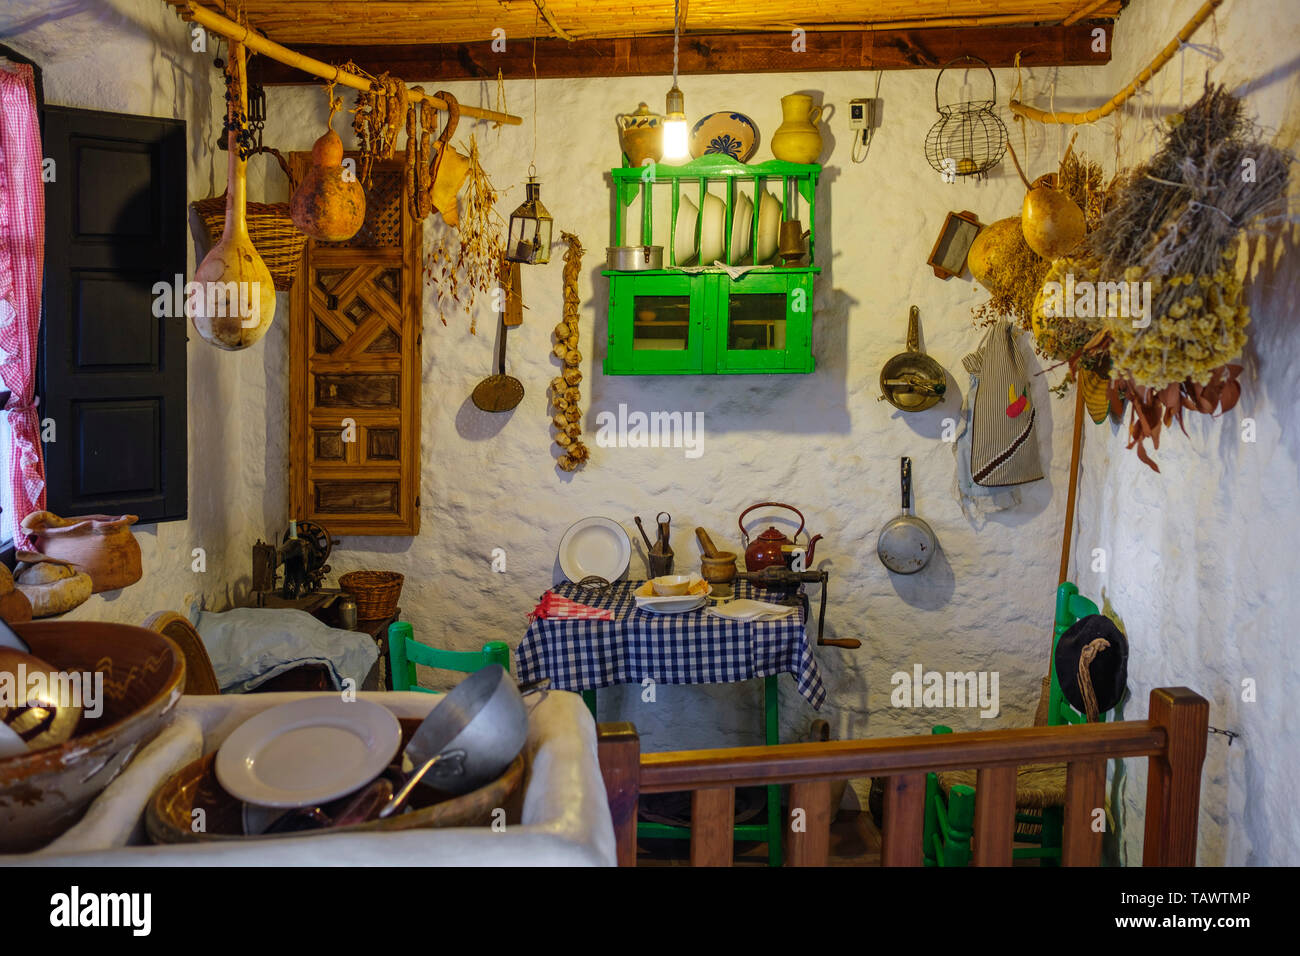 Typical traditional Andalusian kitchen. Casa Ethnographic Museum, Mijas Pueblo. Malaga province, Costa del Sol. Andalusia, Spain Europe Stock Photo